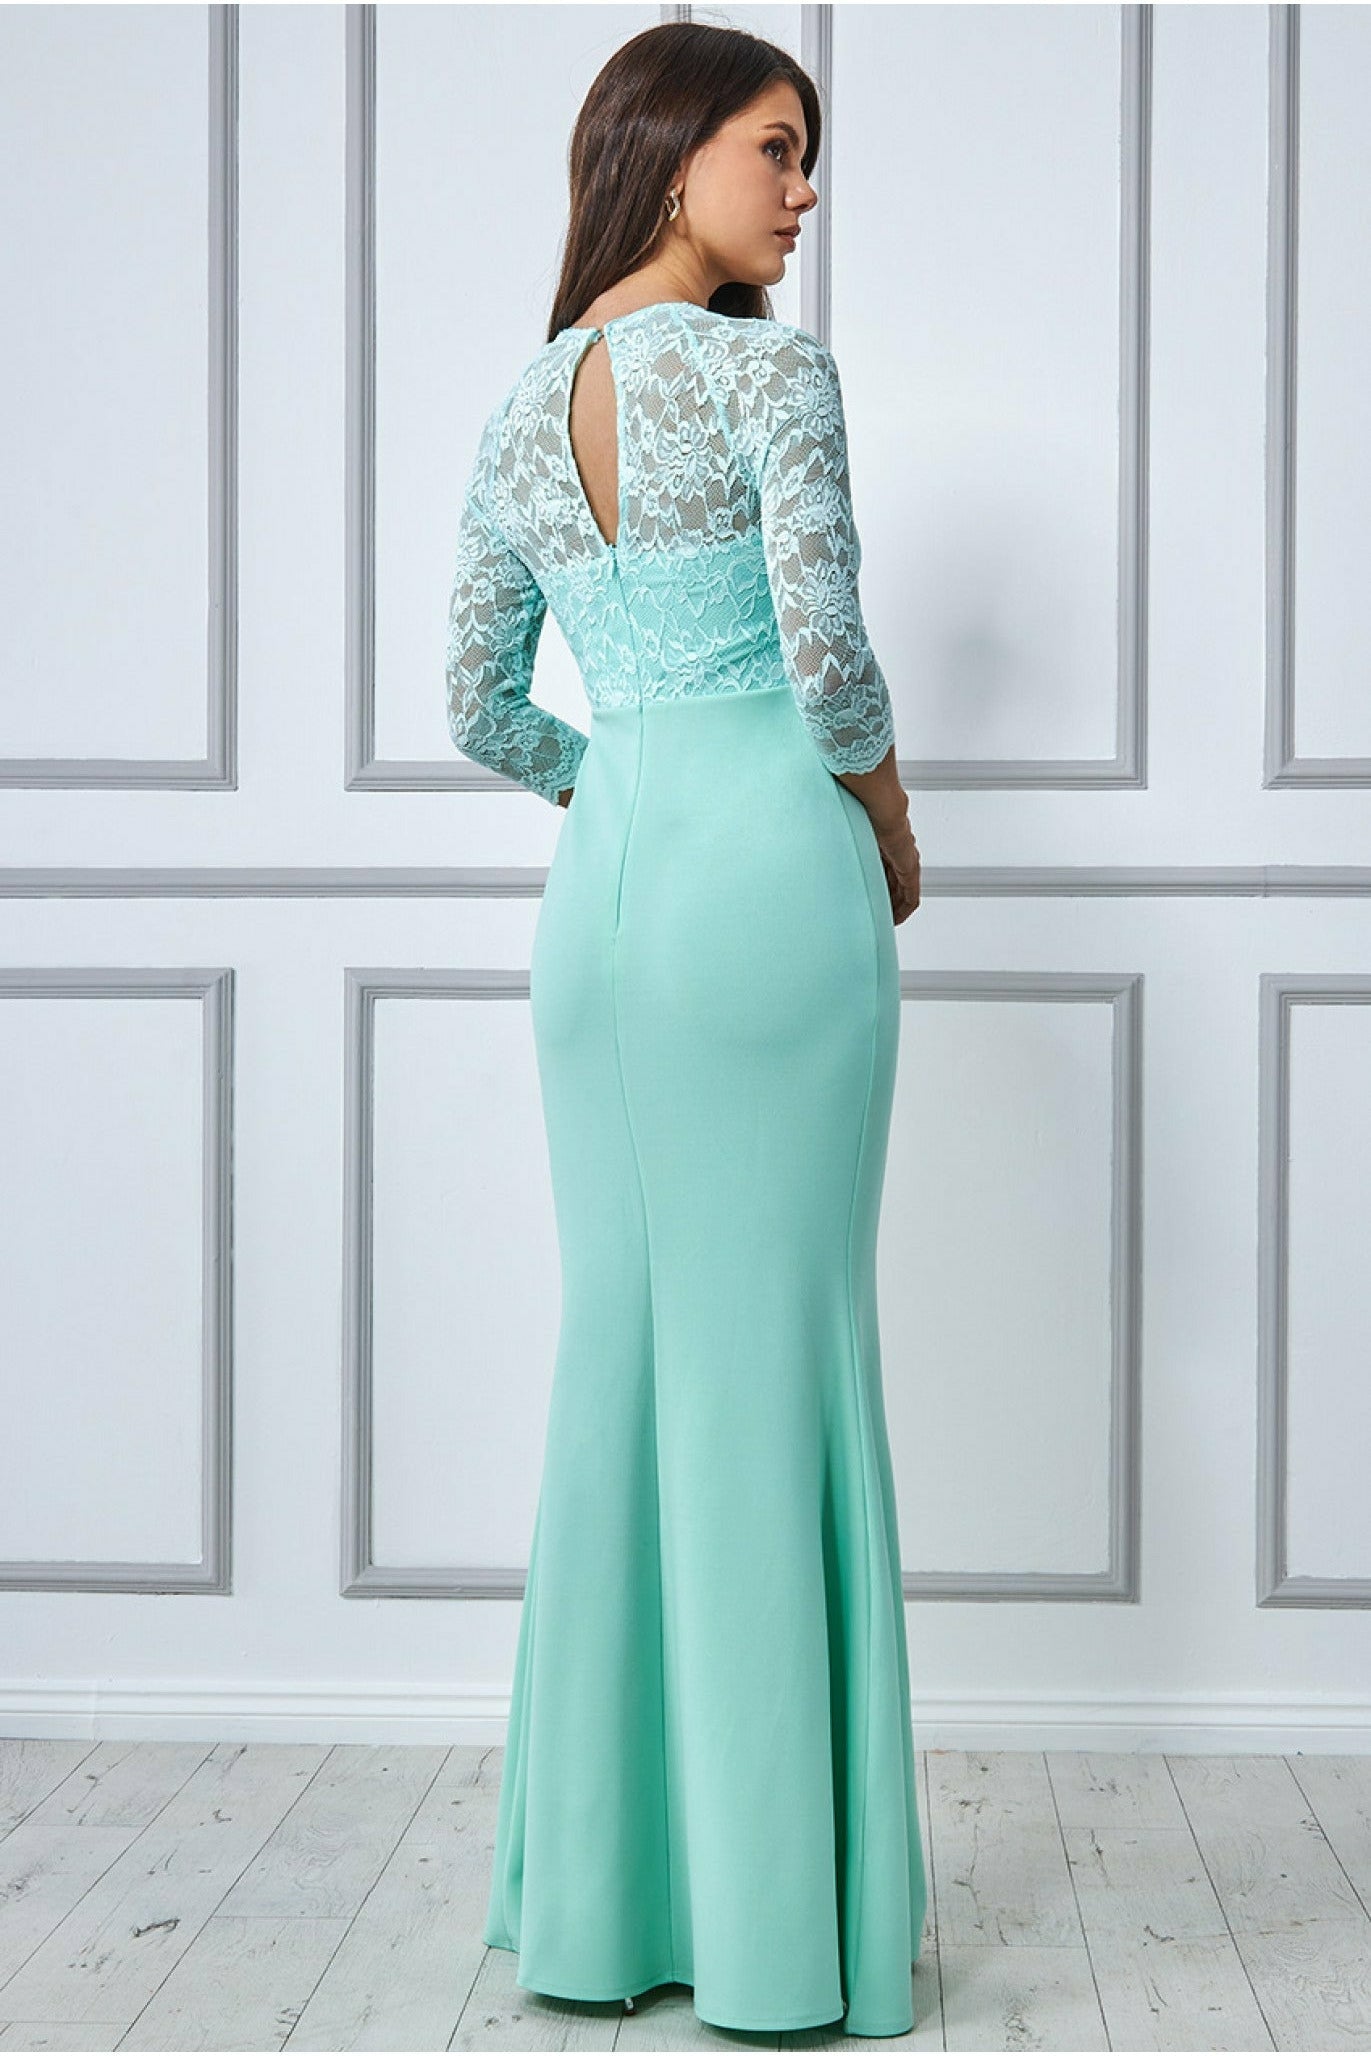 Lace Bodice Maxi Dress With Sleeves - Mint DR1551